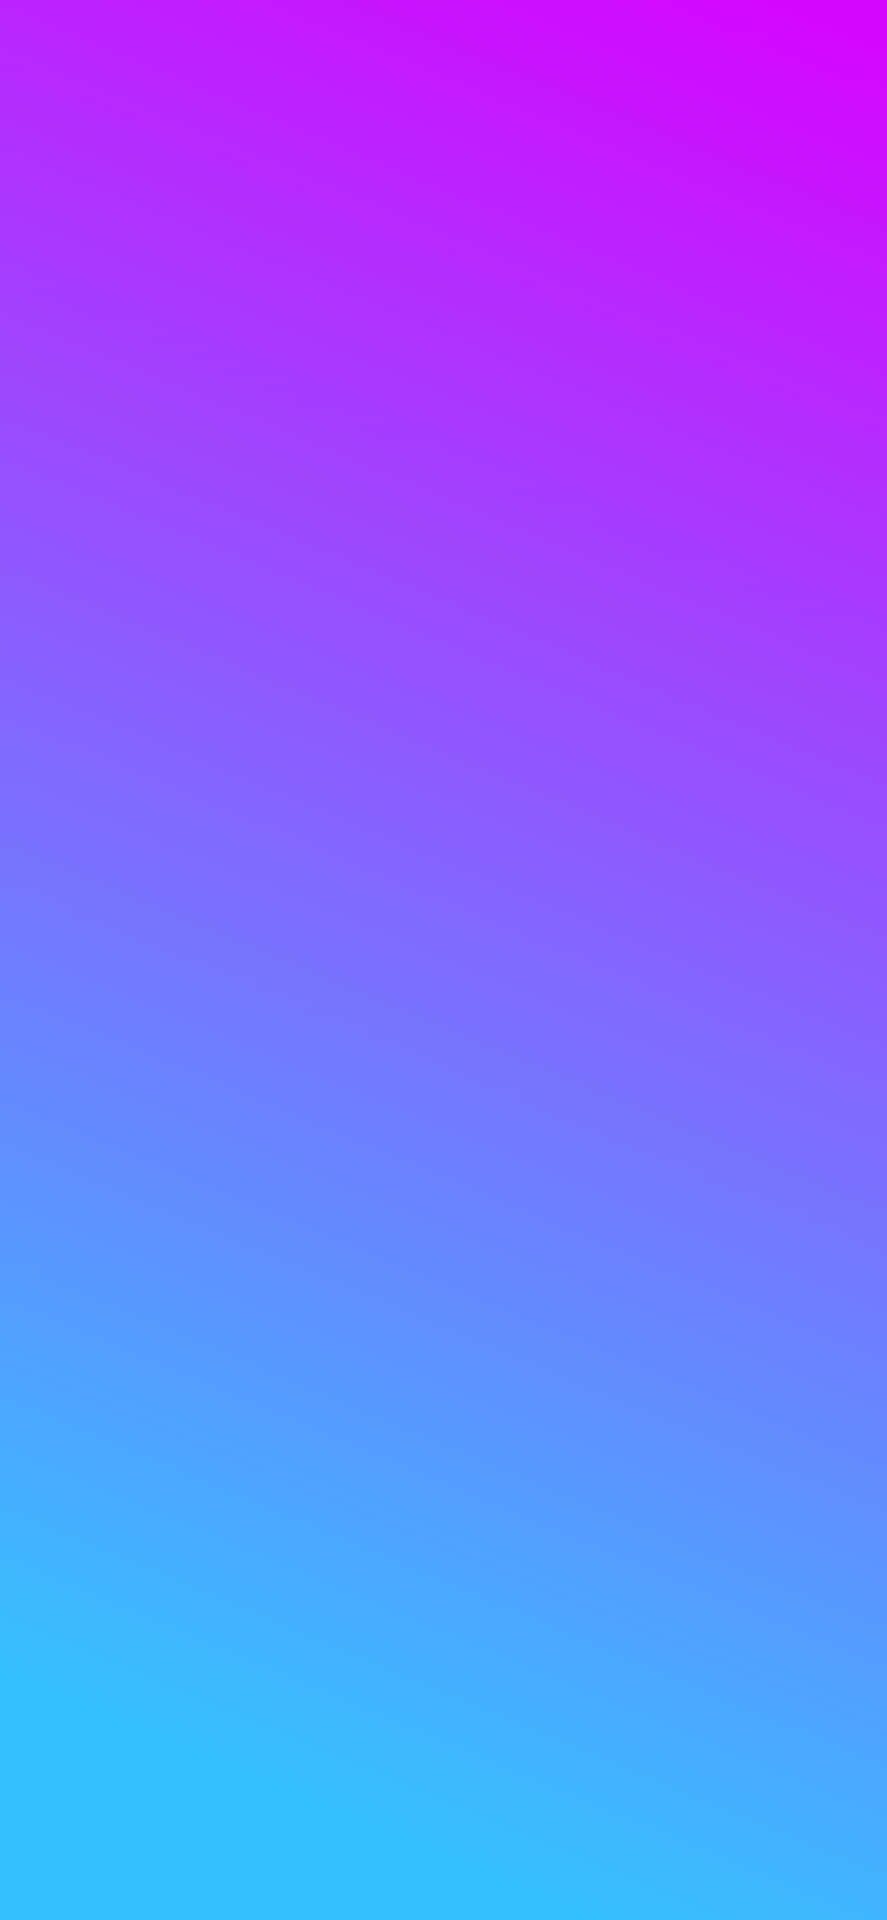 Abstract background featuring purple, blue, and violet colors